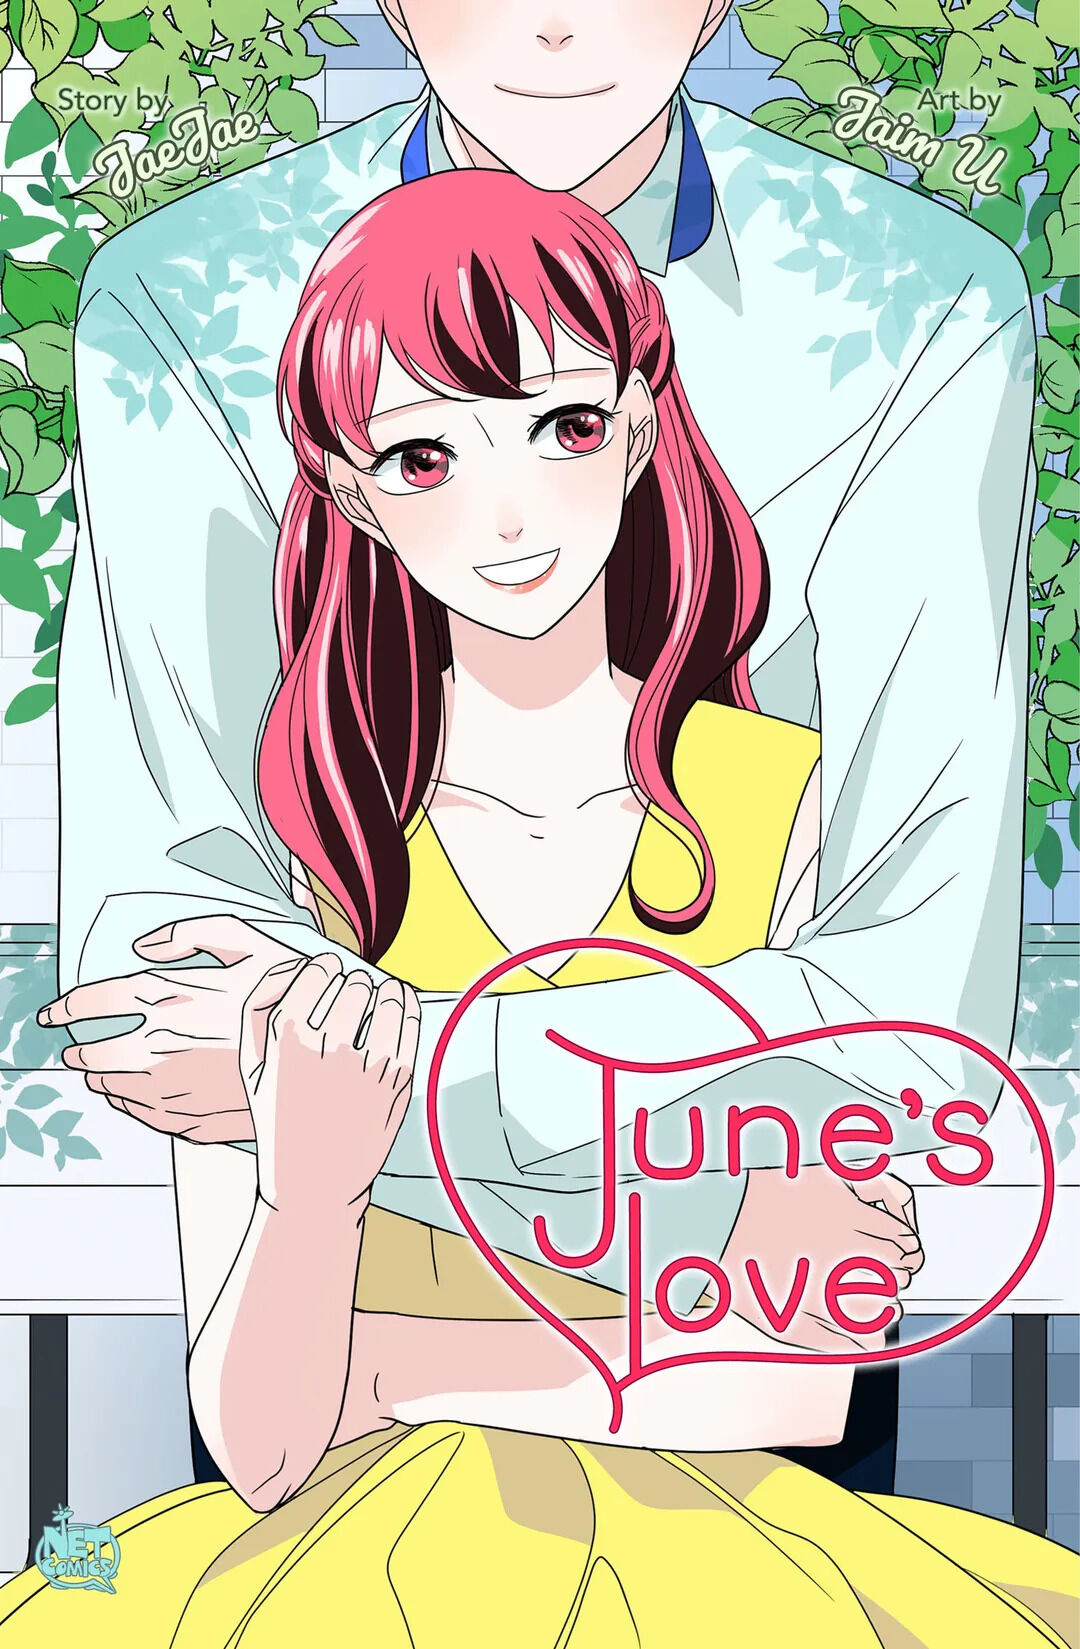 June’S Love - Page 1